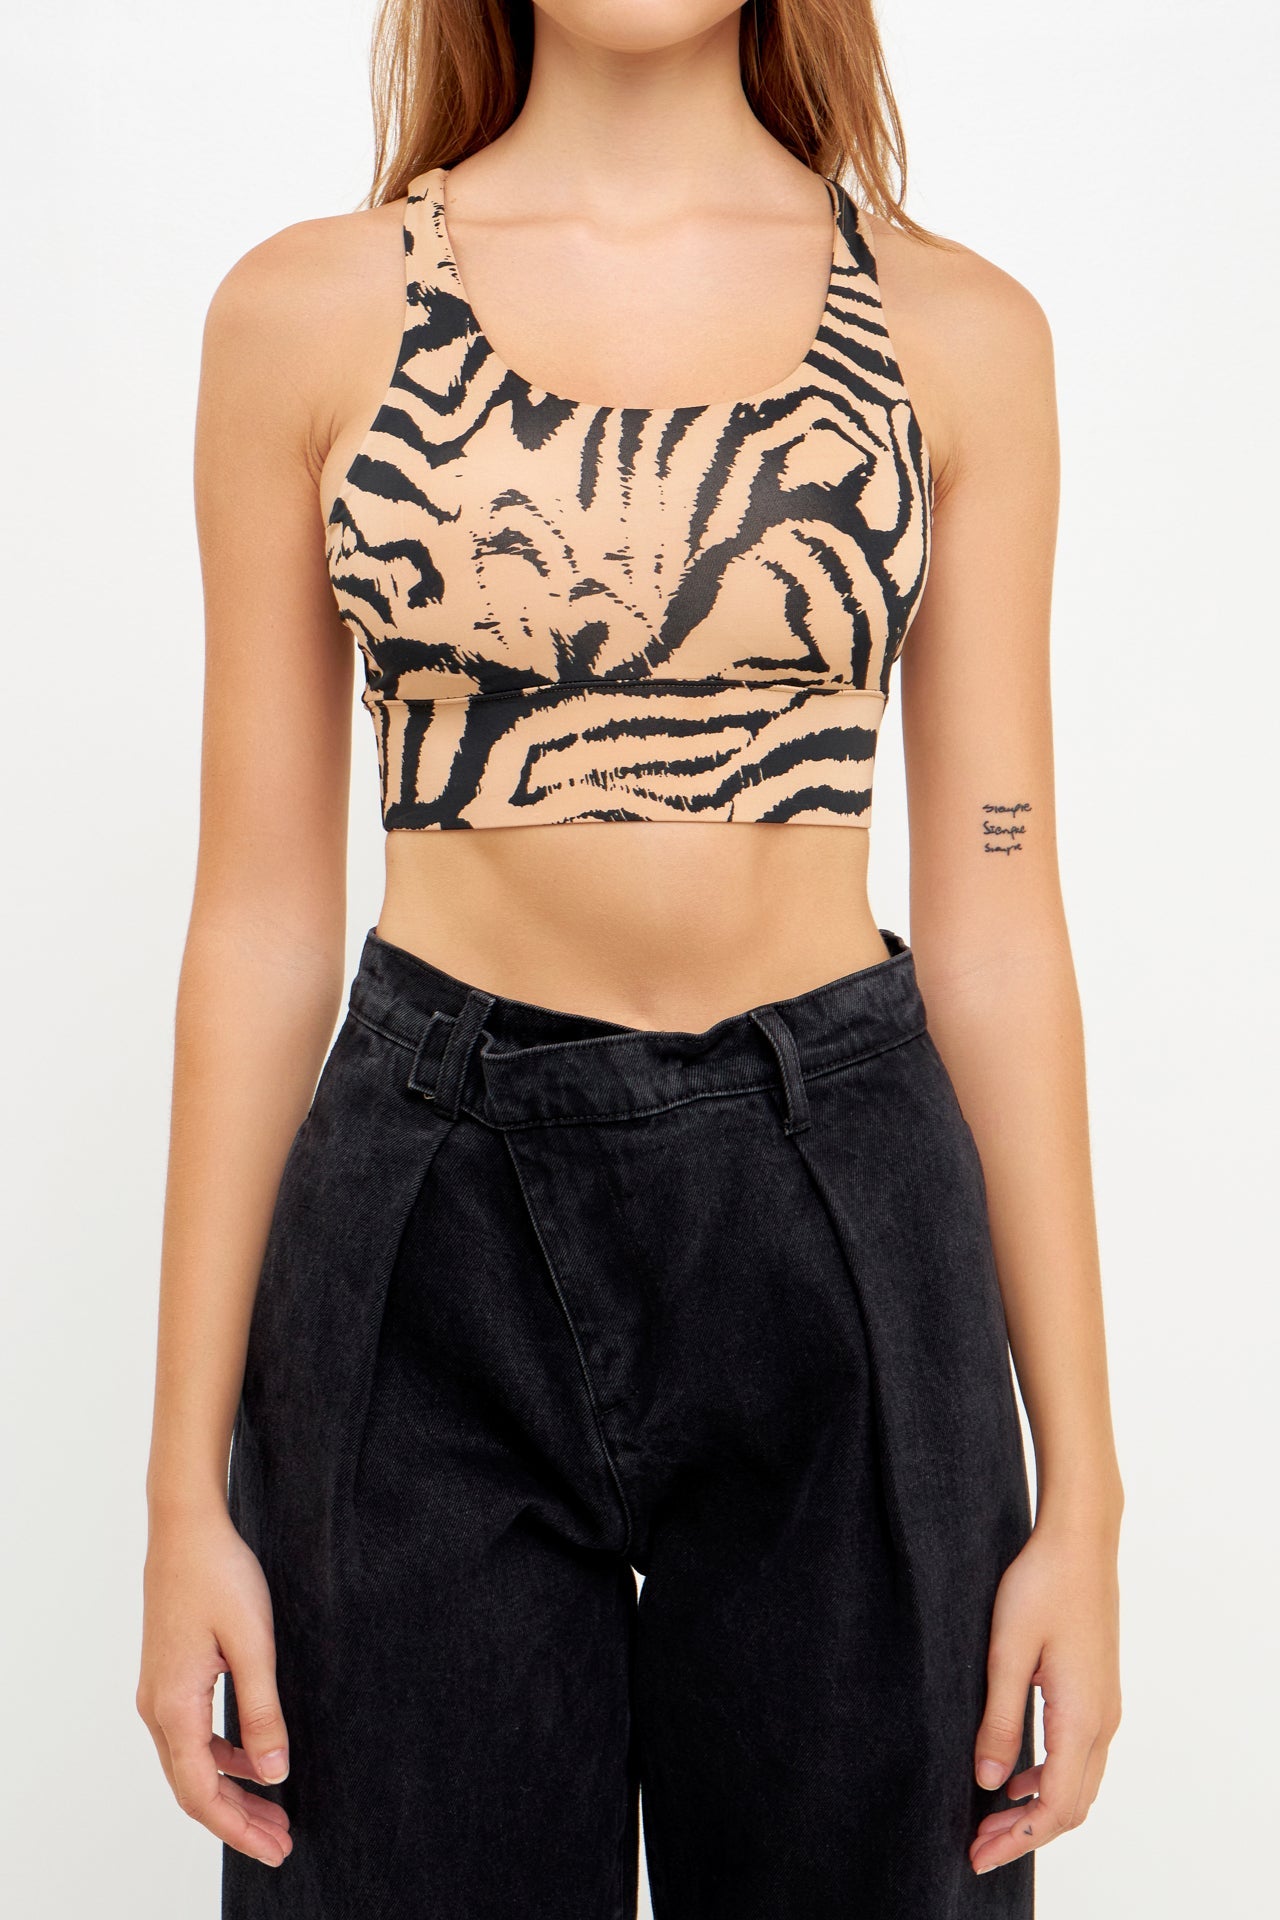 GREY LAB-Animal Print Top-TOPS available at Objectrare